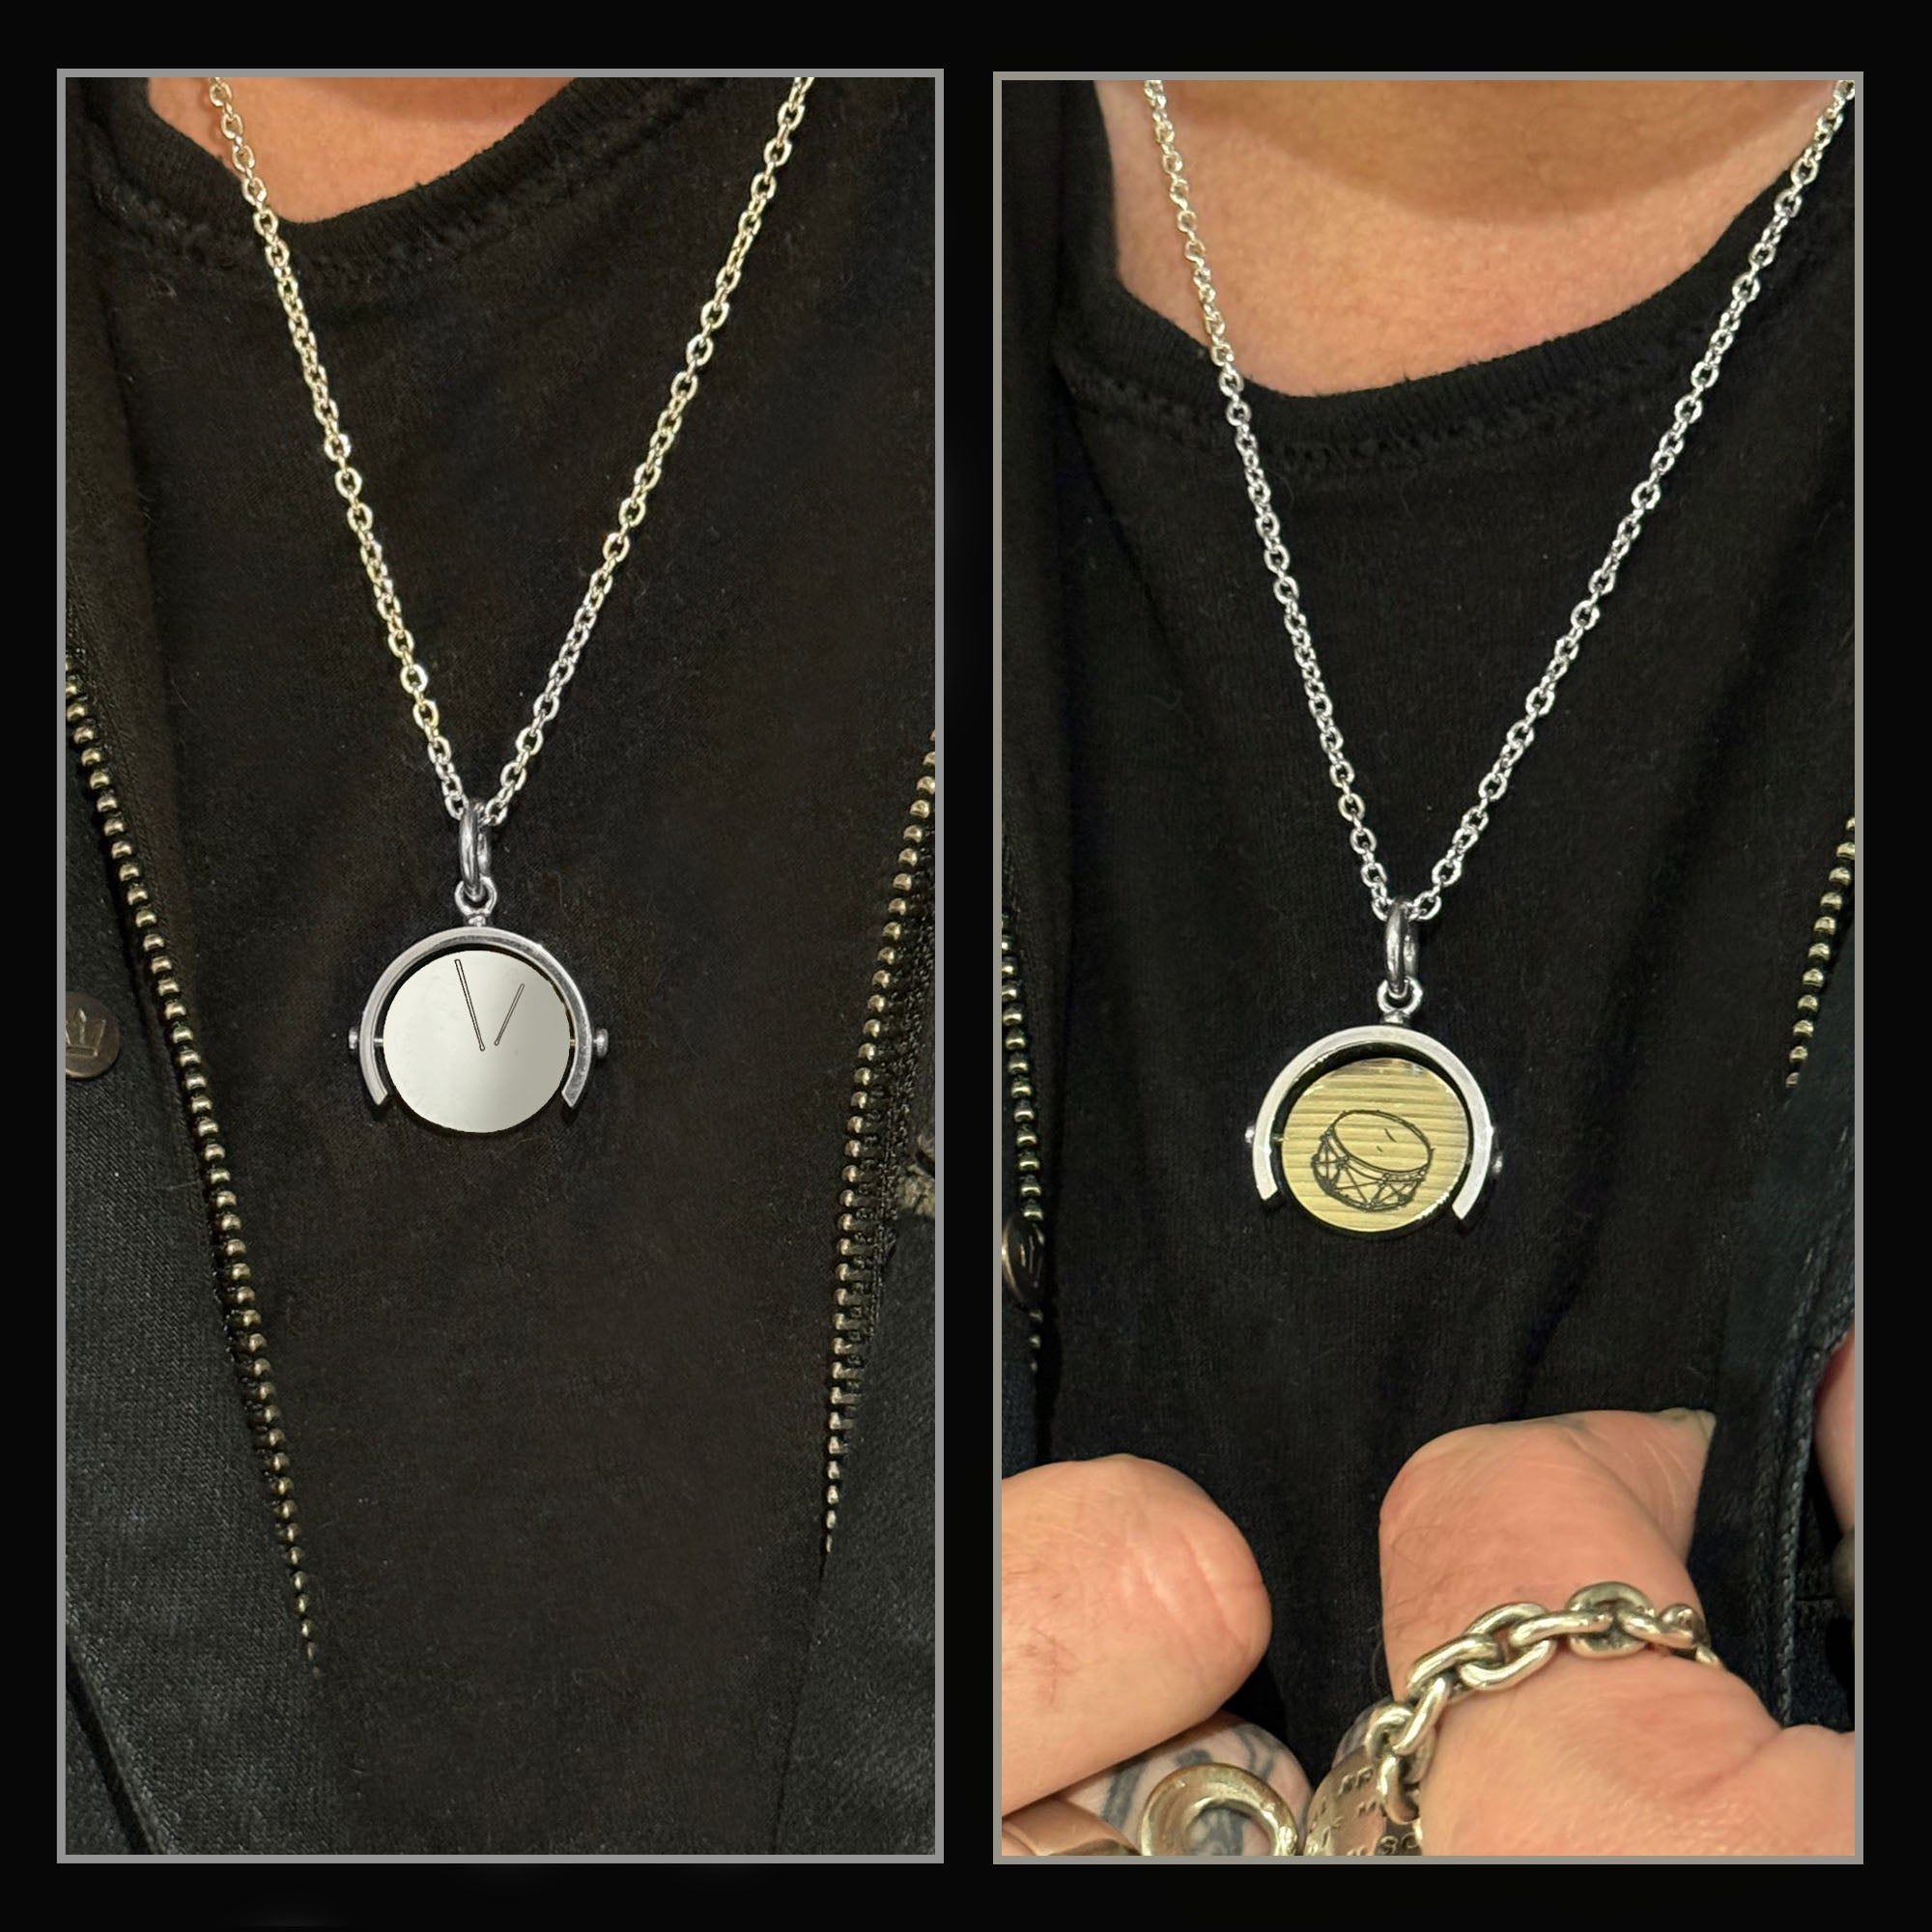 Roger Taylor - Taylored 'Drum' Spinner Pendant